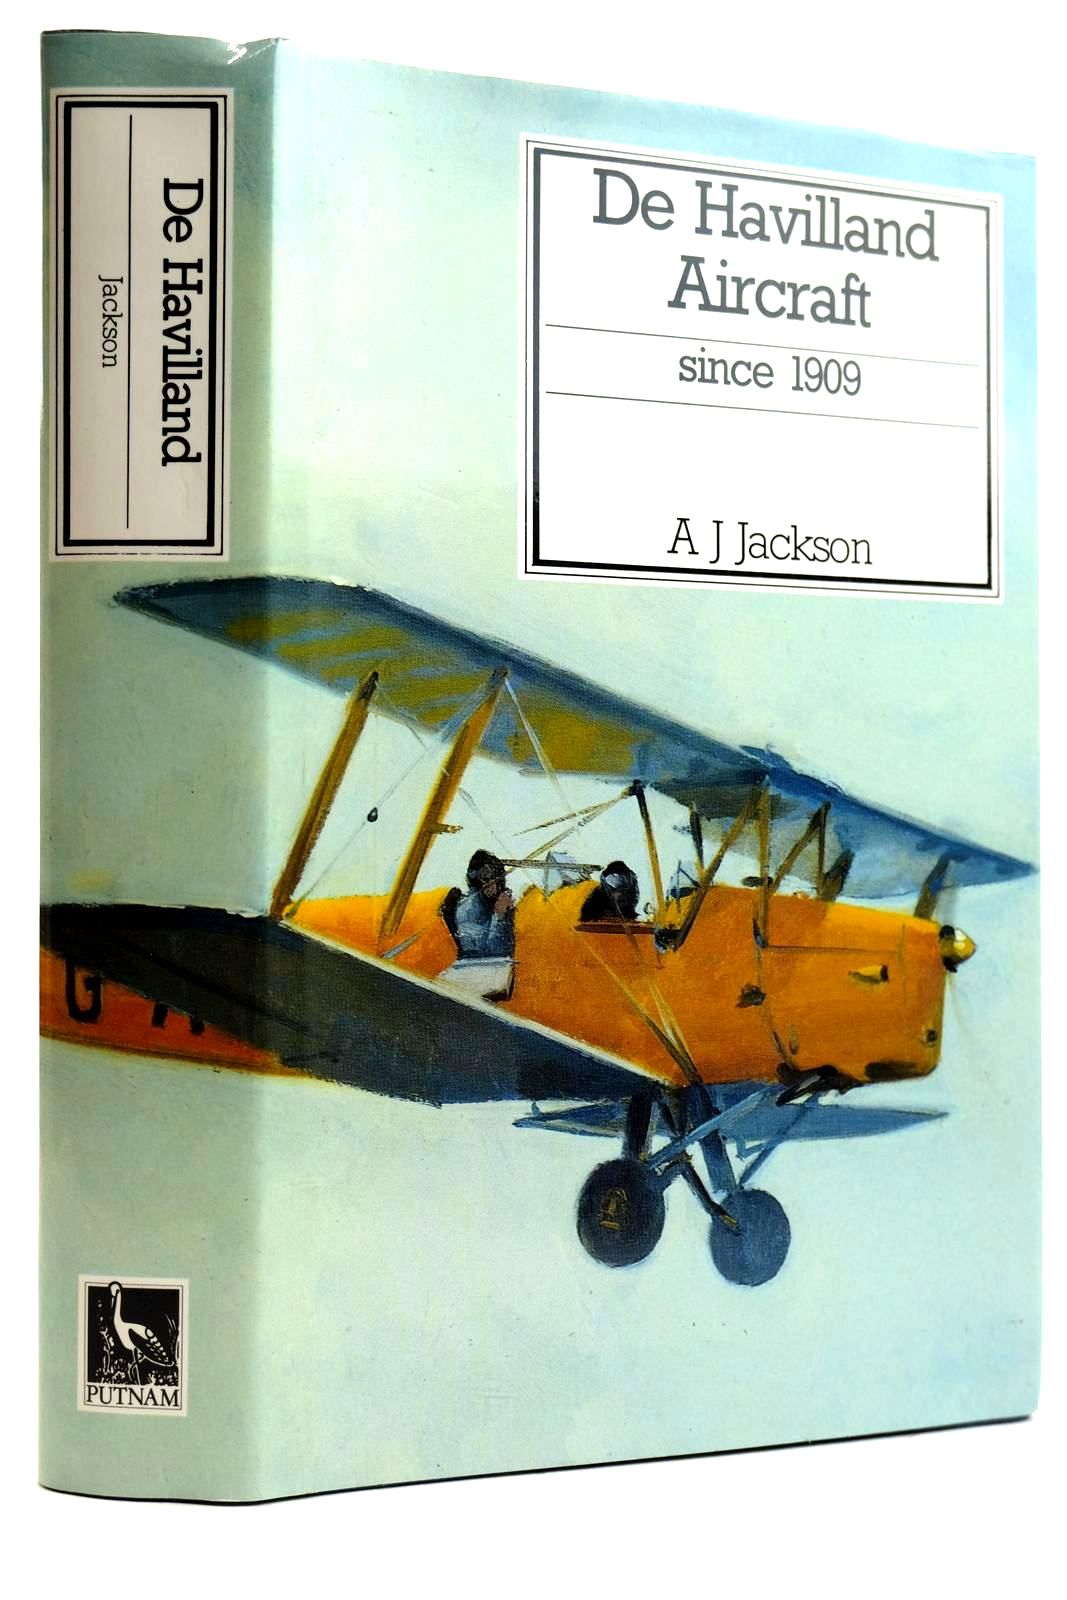 Photo of DE HAVILLAND AIRCRAFT SINCE 1909 written by Jackson, A.J. published by Putnam (STOCK CODE: 2132077)  for sale by Stella & Rose's Books